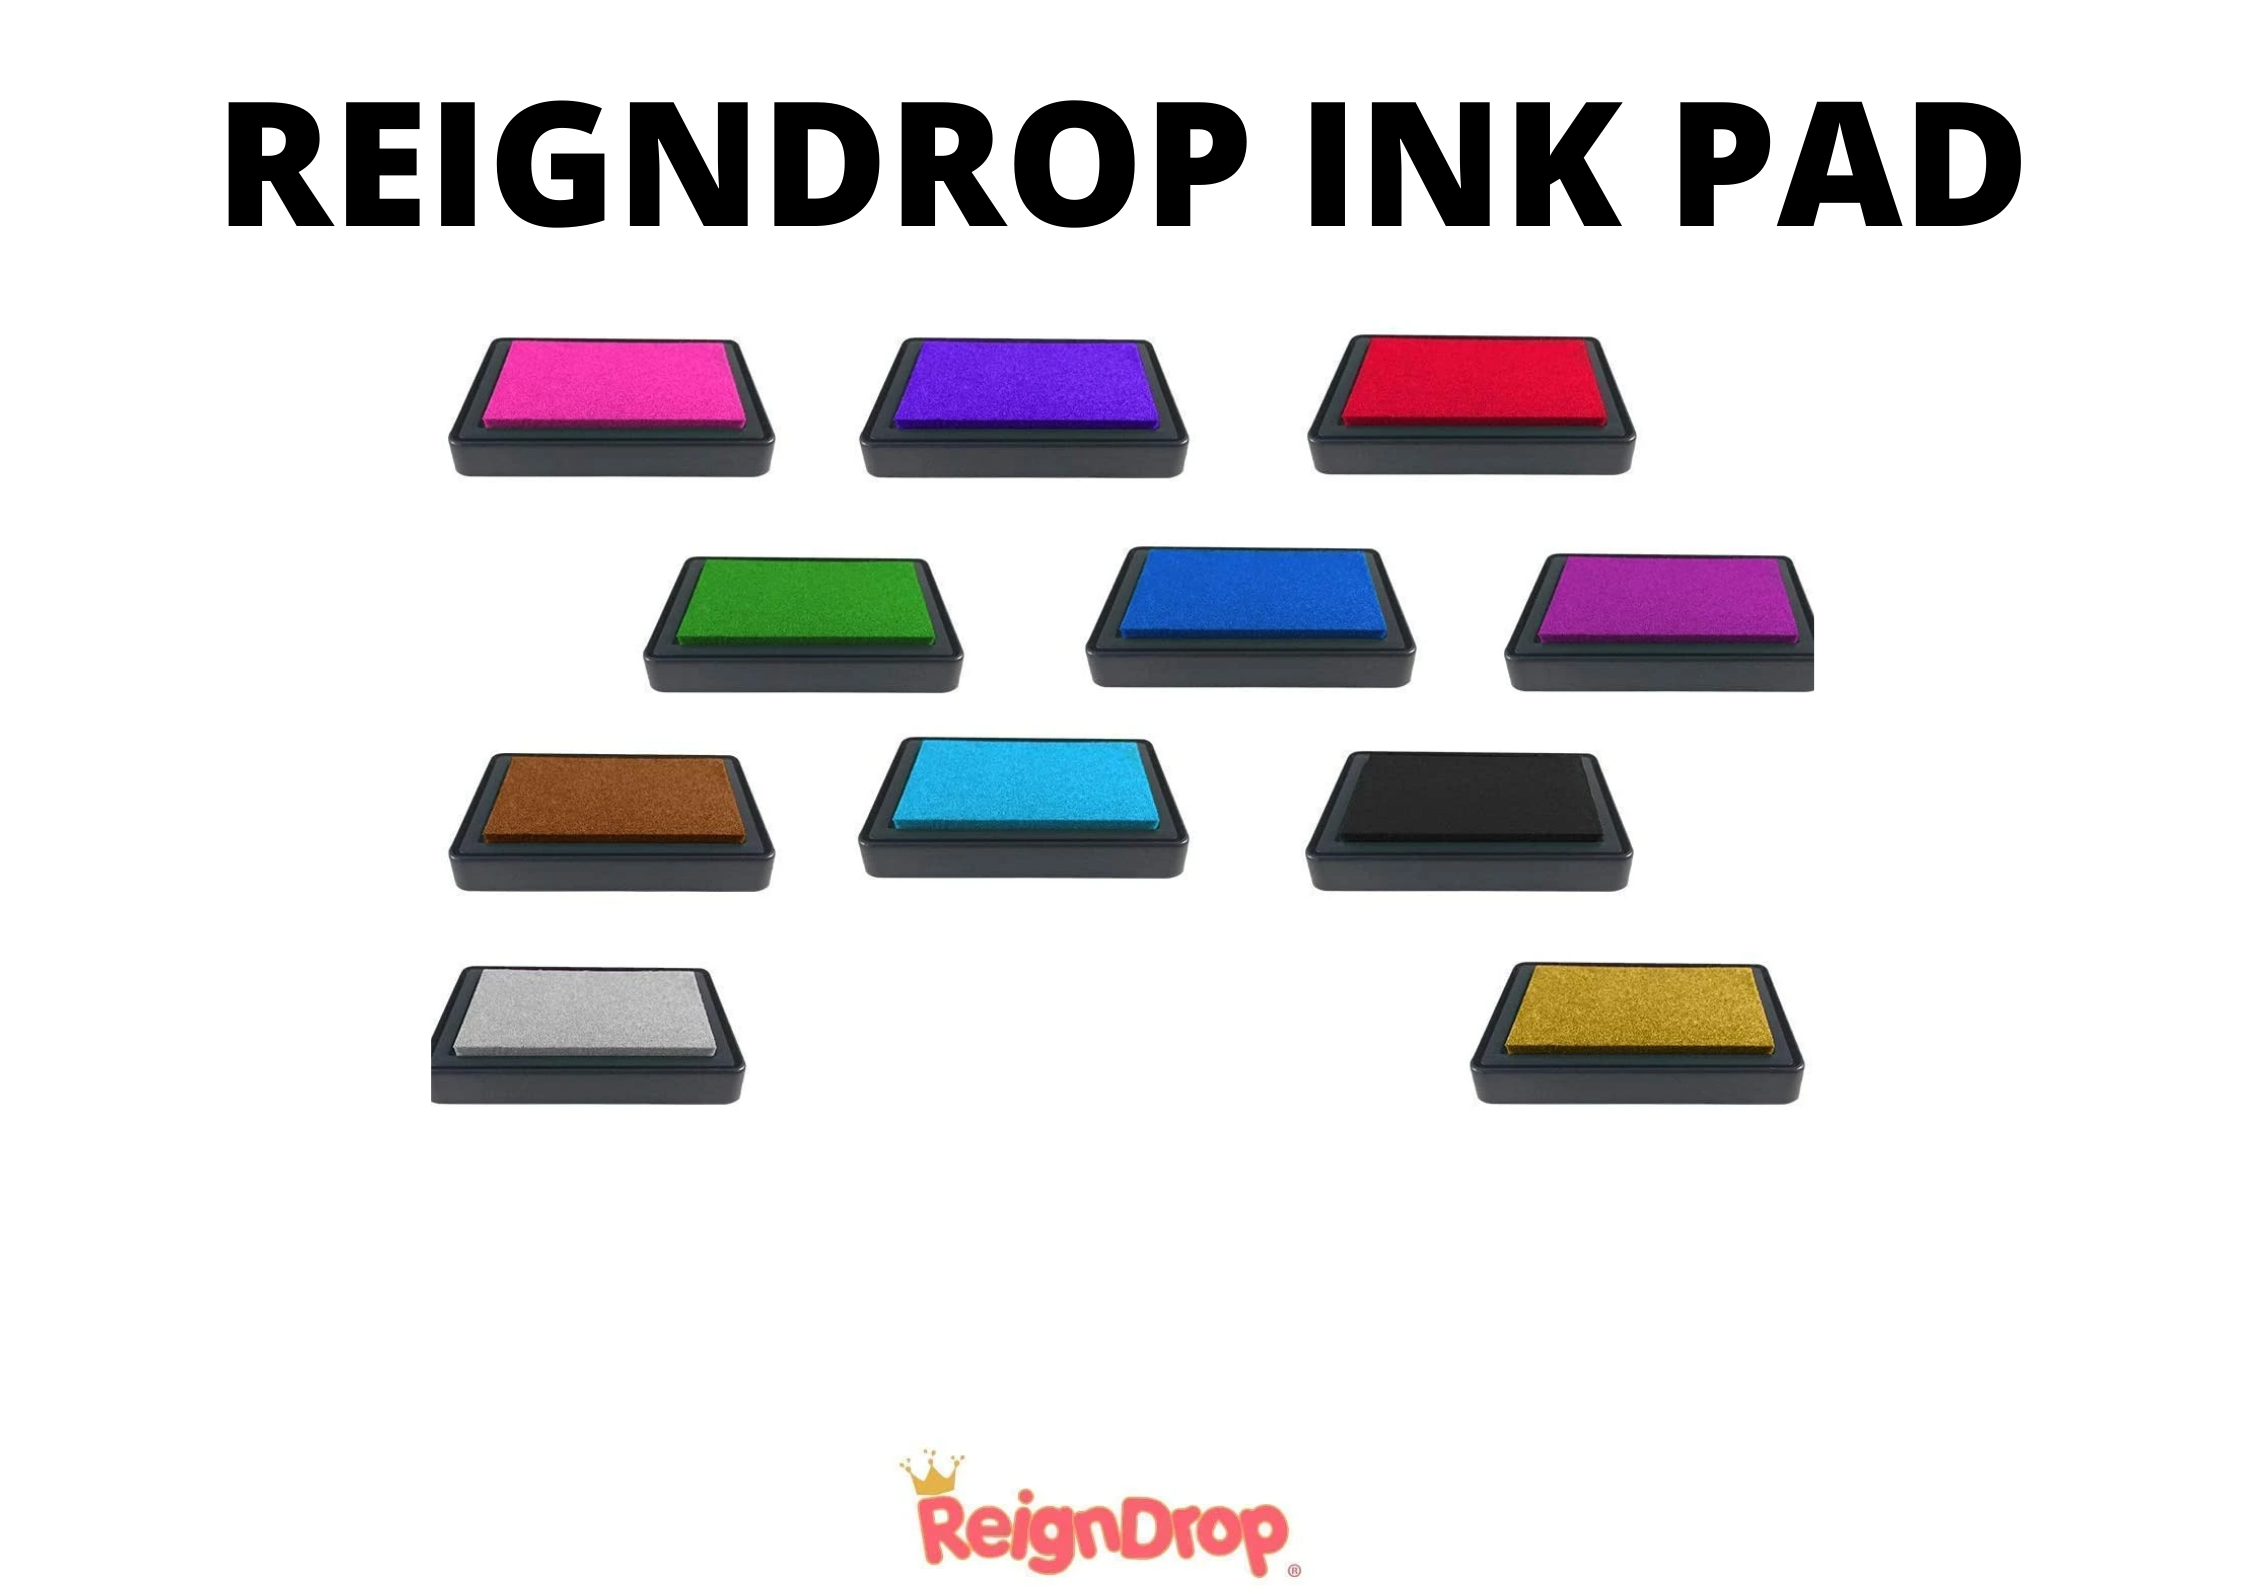 ReignDrop Ink Pad For Baby (Green)